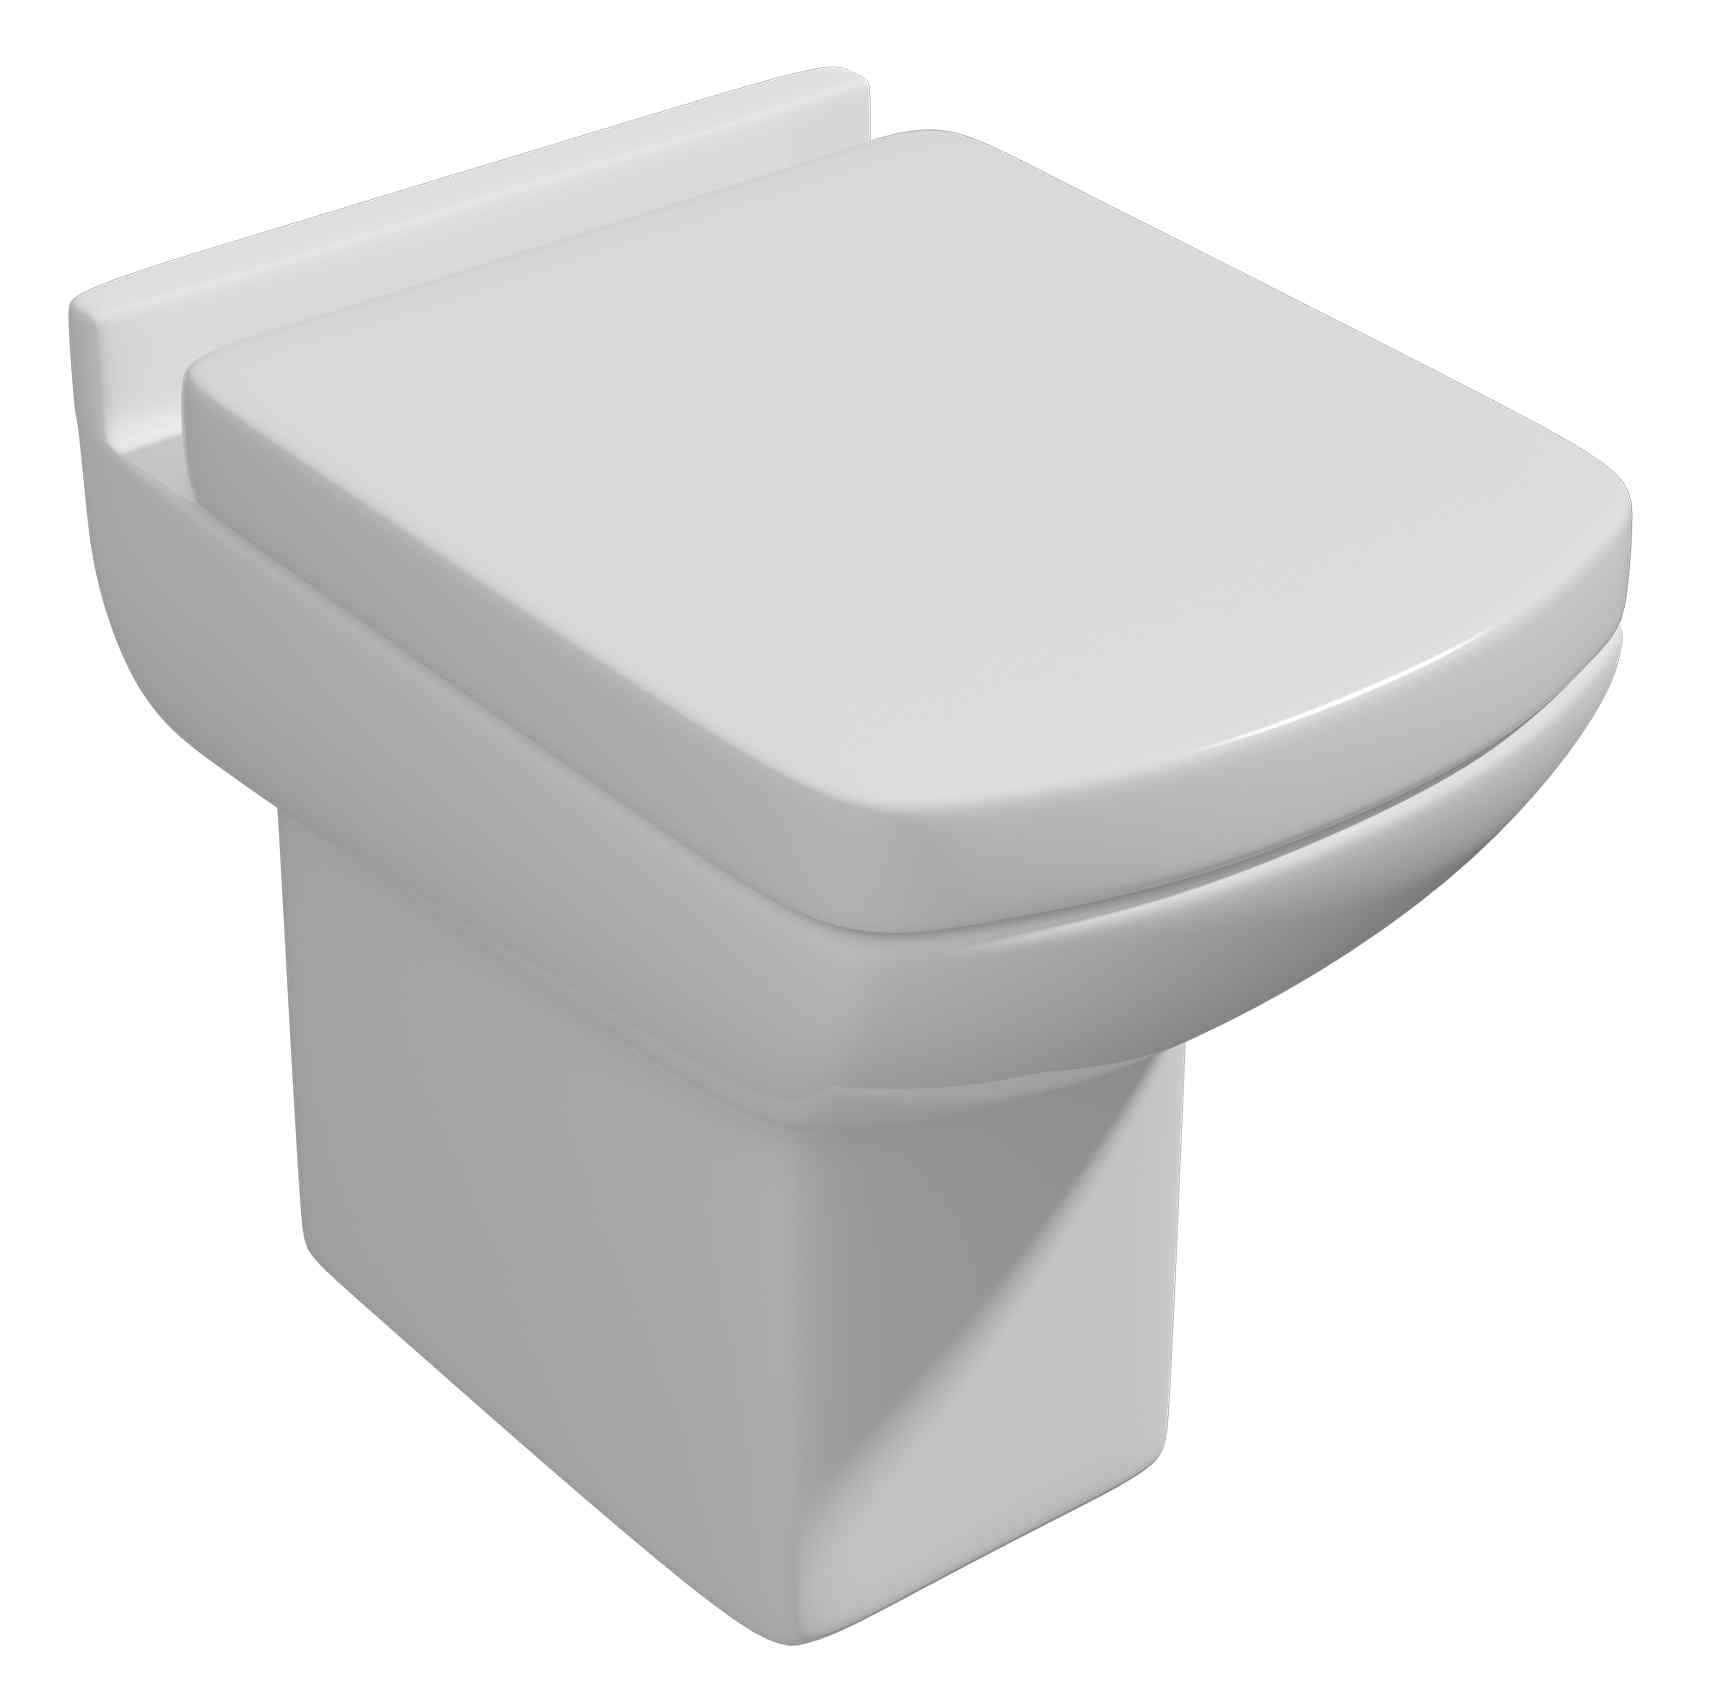 Upgrade Your Bathroom with Matrix Storm Grey Gloss Toilet and Basin Suite